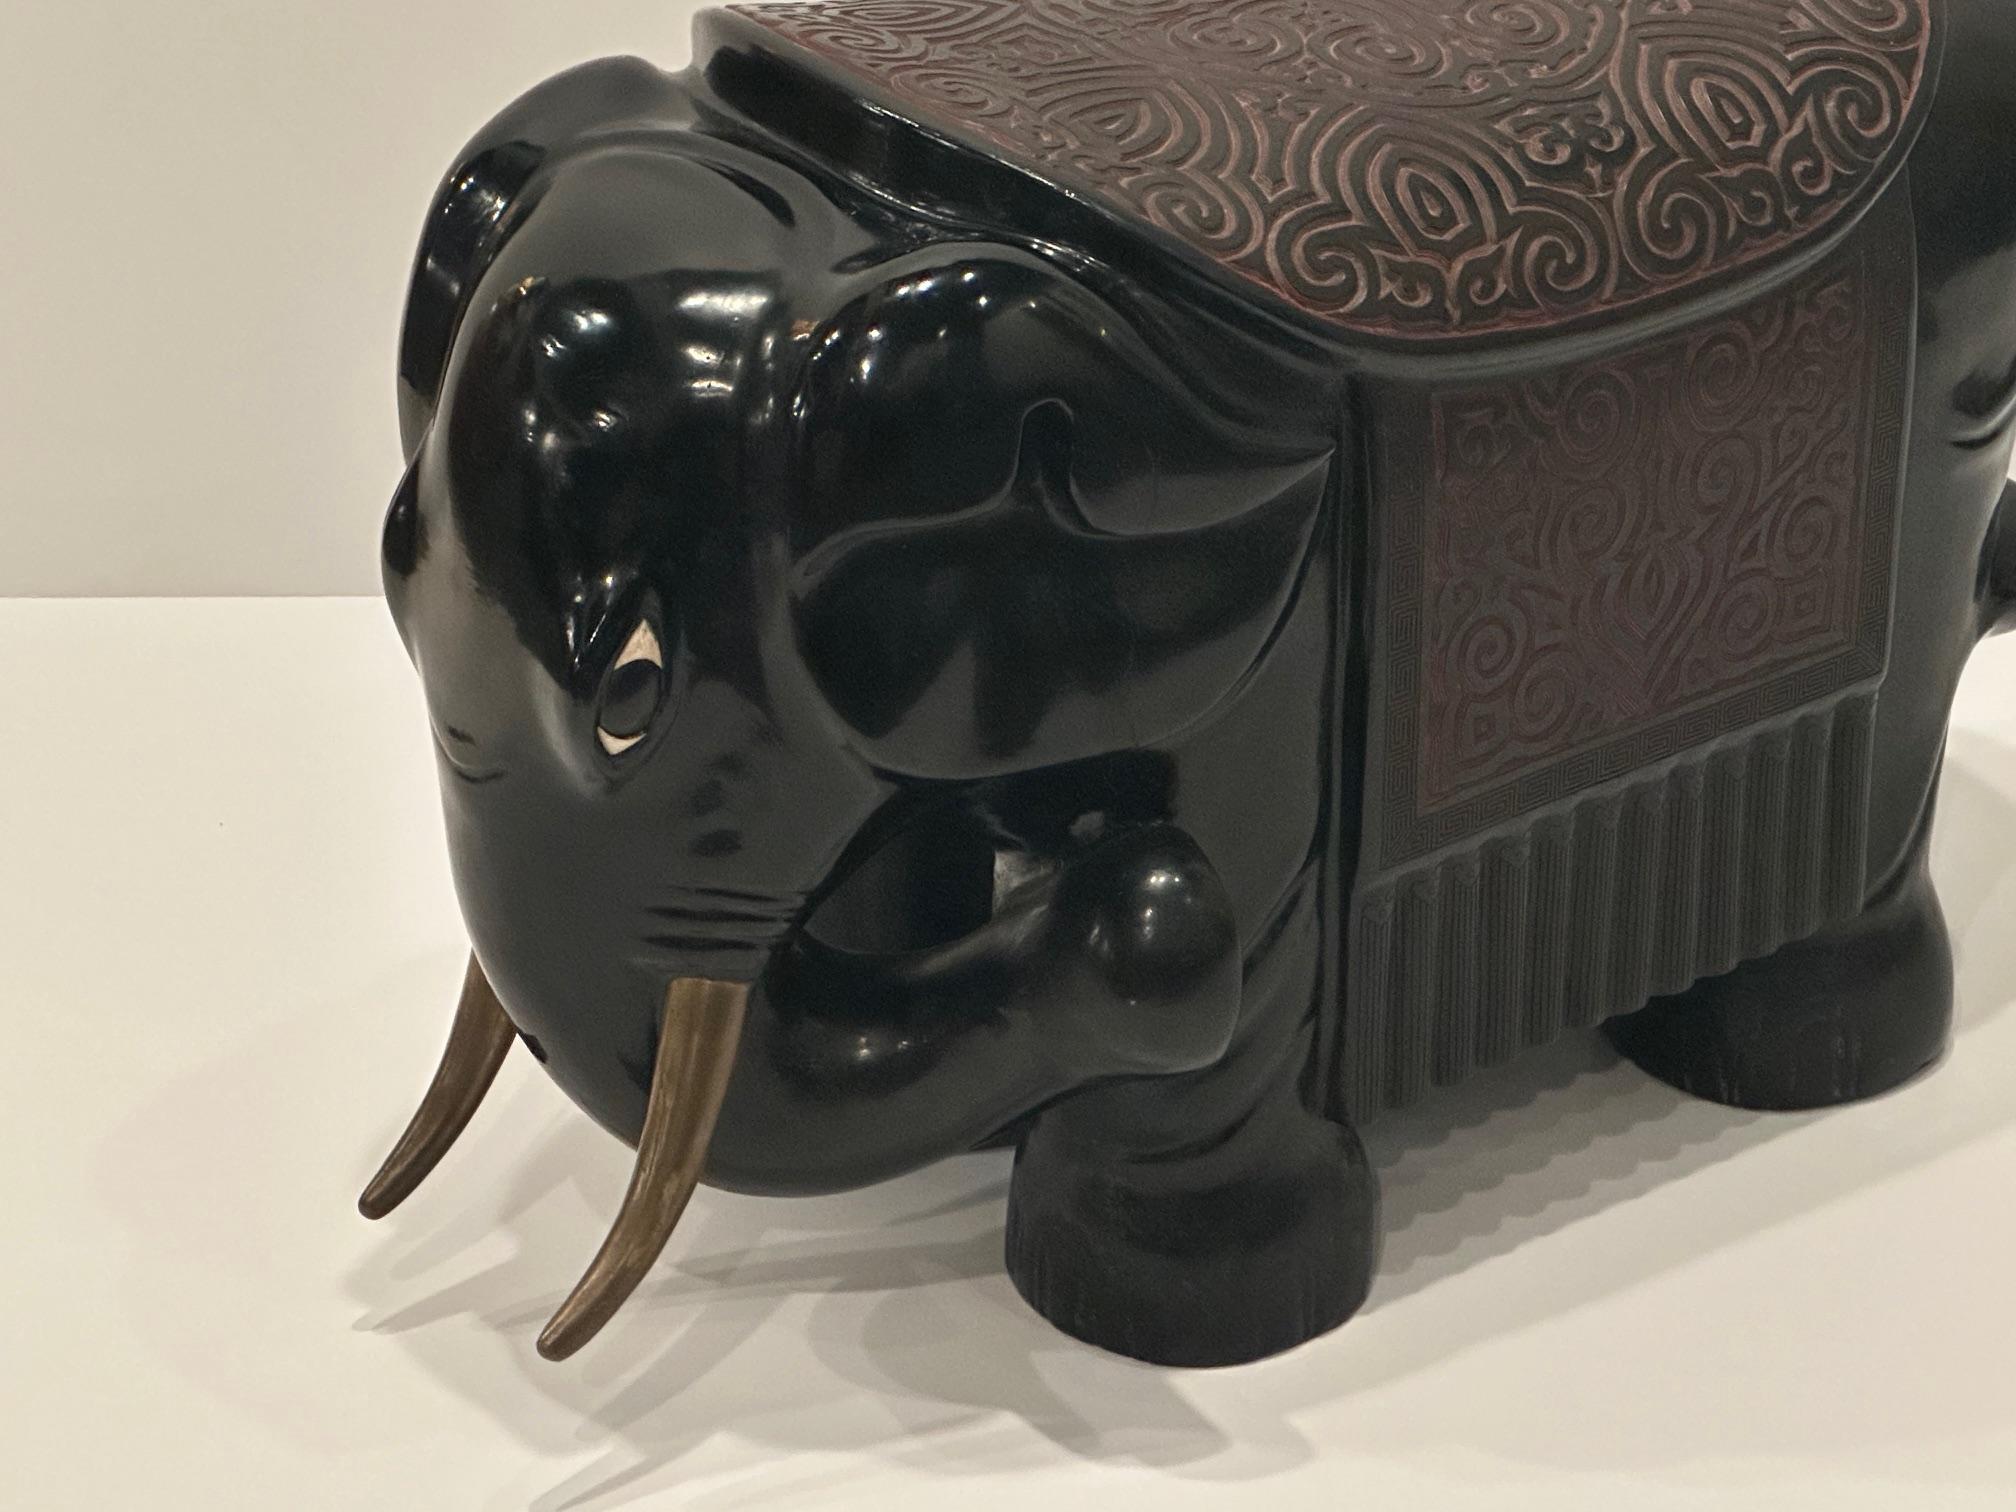 Late 20th Century Rare Black Lacquer Carved Wood Elephant Garden Seat End Table with Brass Tusks For Sale